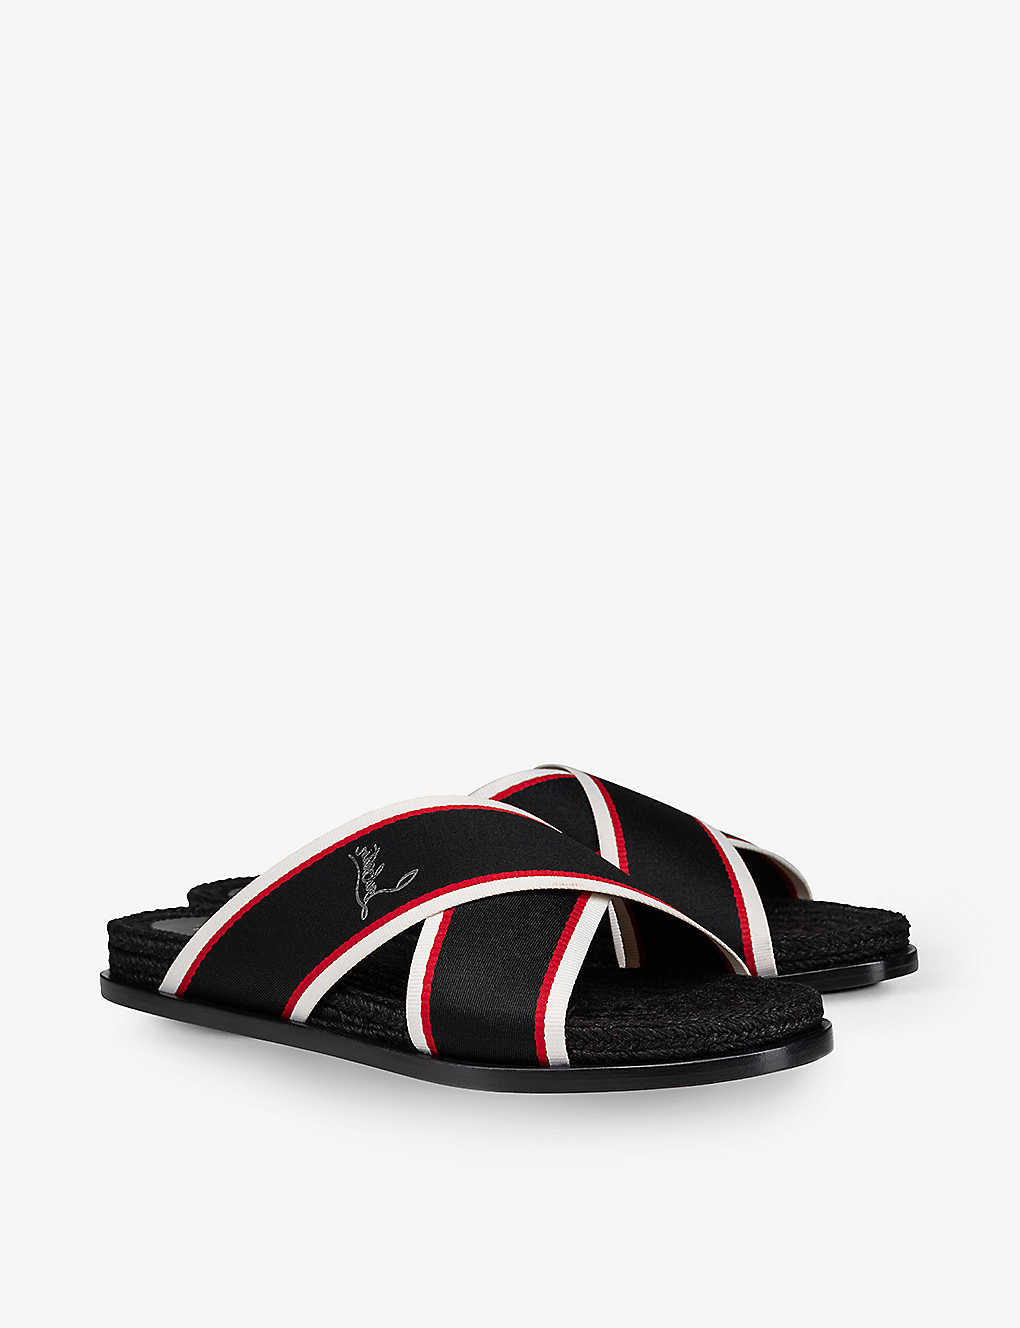 CHRISTIAN LOUBOUTIN Hot Cross leather and cotton sliders